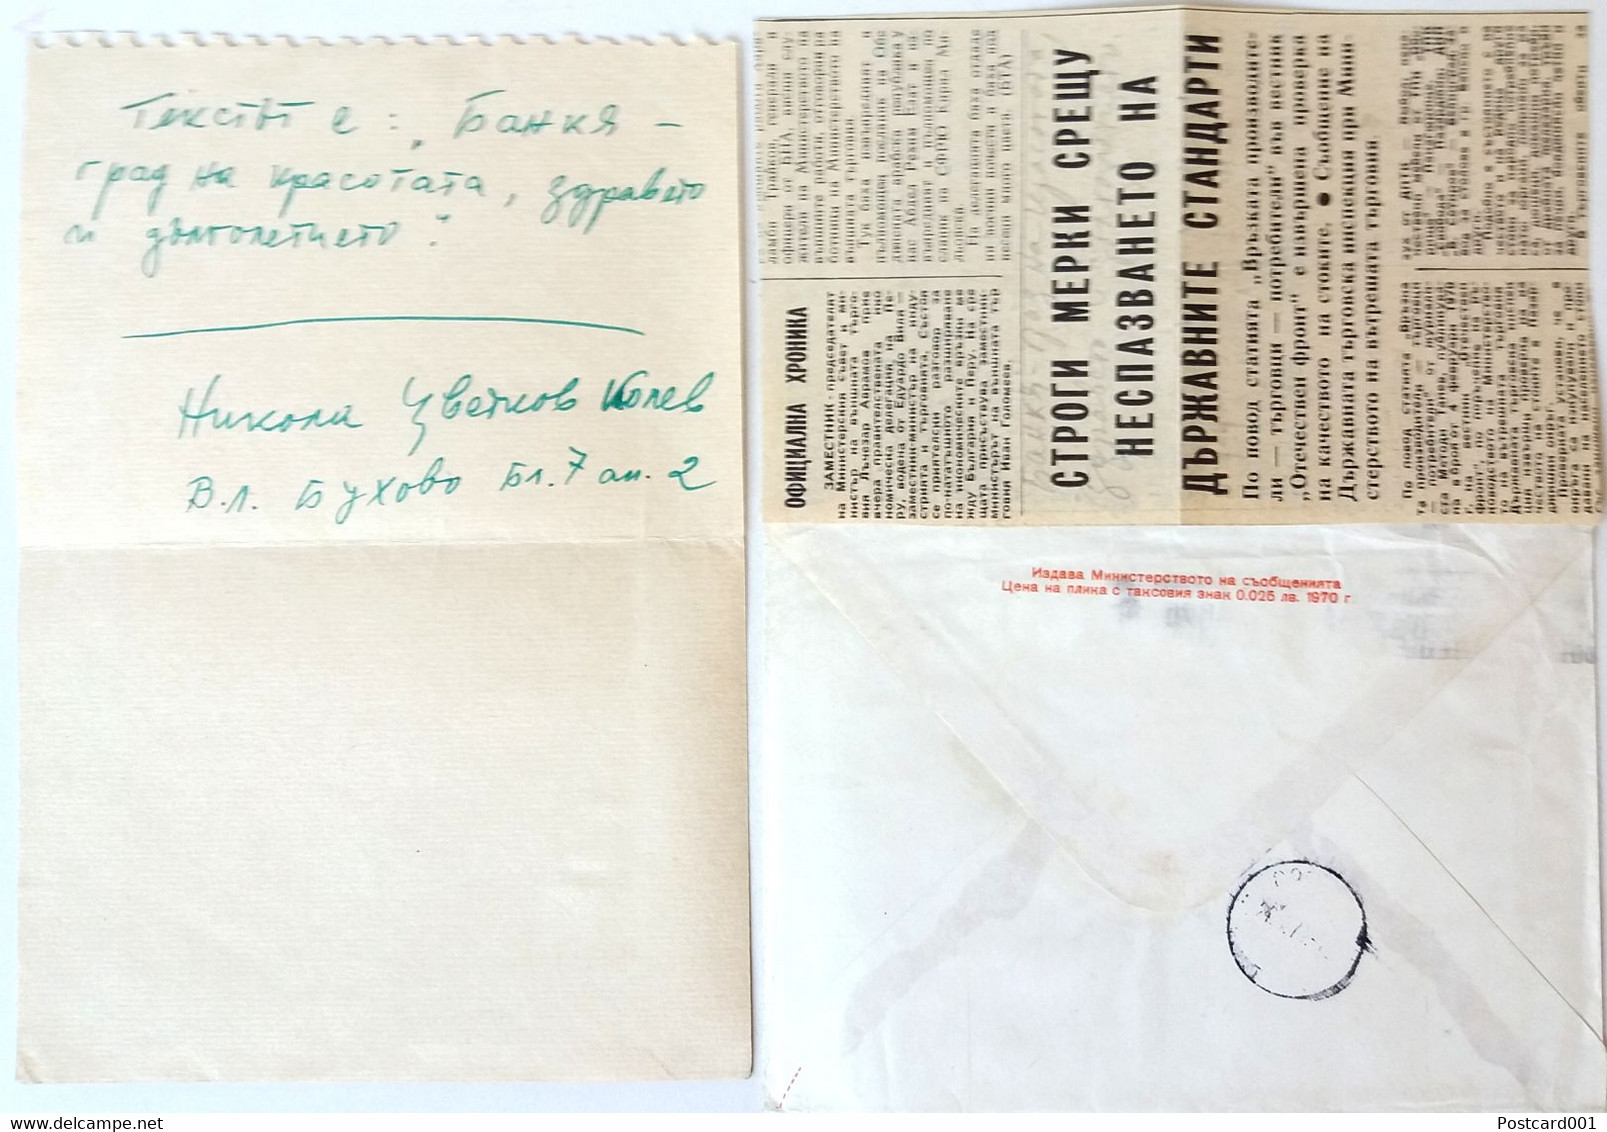 №50 Traveled Envelope, Letter To Gazette 'Fatherland Front' And Crossword, Bulgaria 1970's - Local Mail - Covers & Documents